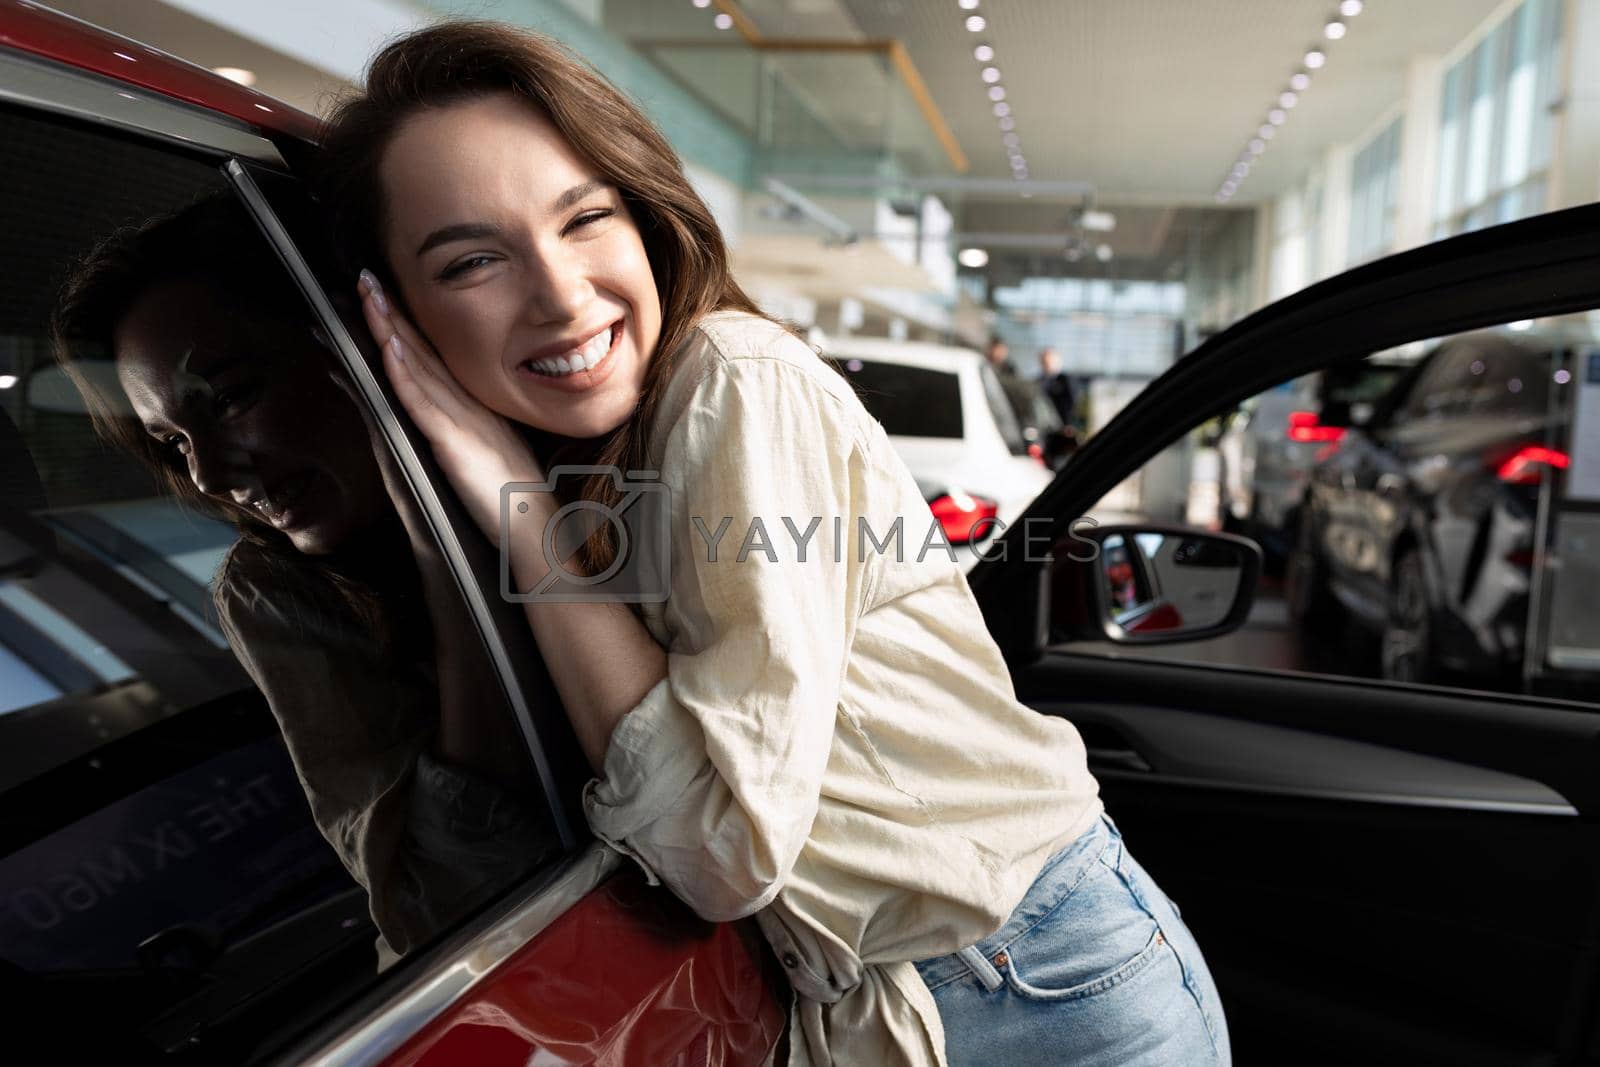 Royalty free image of young woman rejoices in buying a new car in a car dealership by TRMK